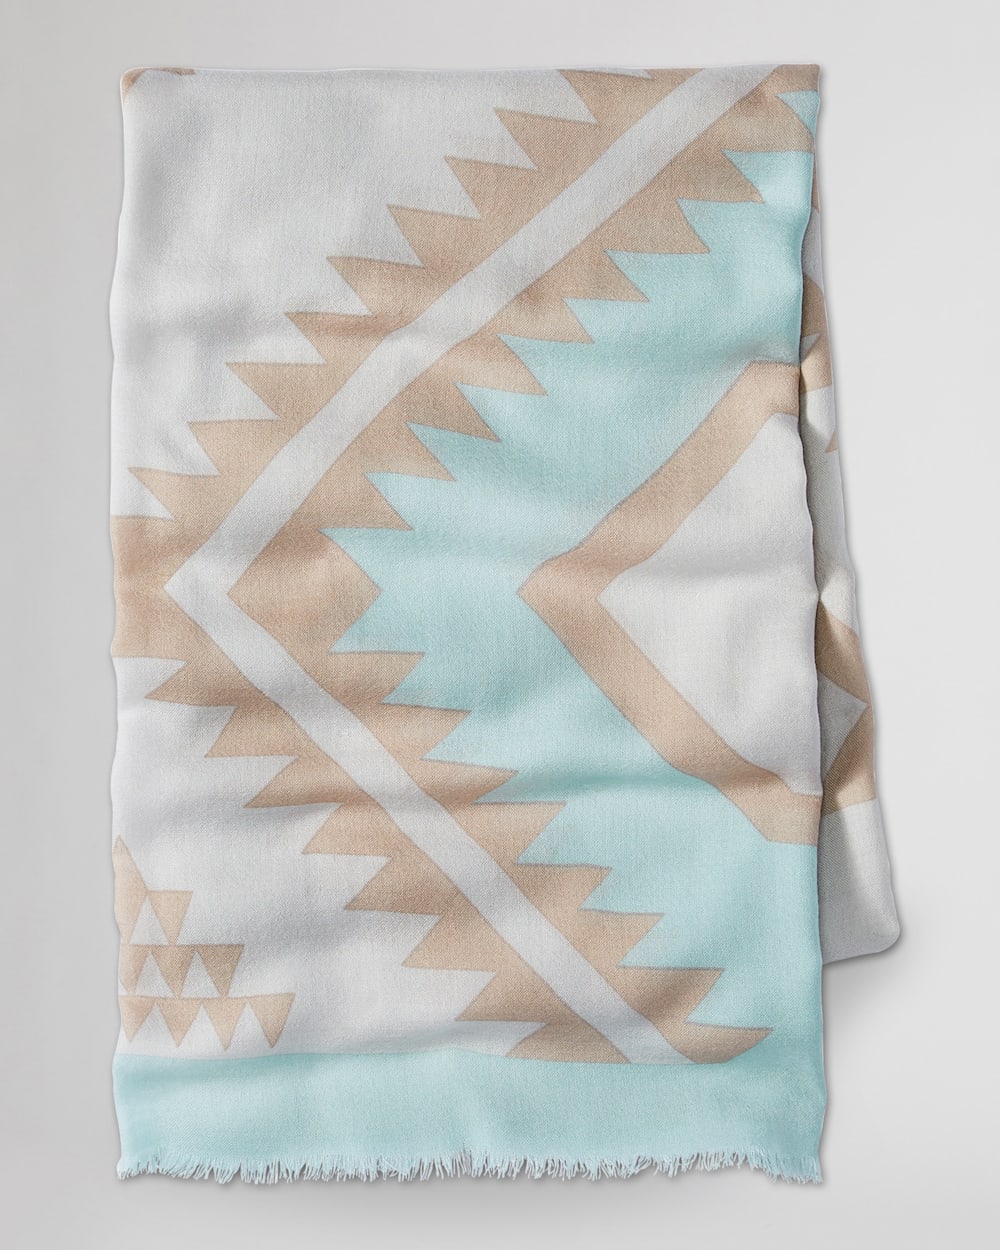 ALTERNATE VIEW OF FEATHERWEIGHT WOOL SCARF IN DESERT SKY BLUE image number 3